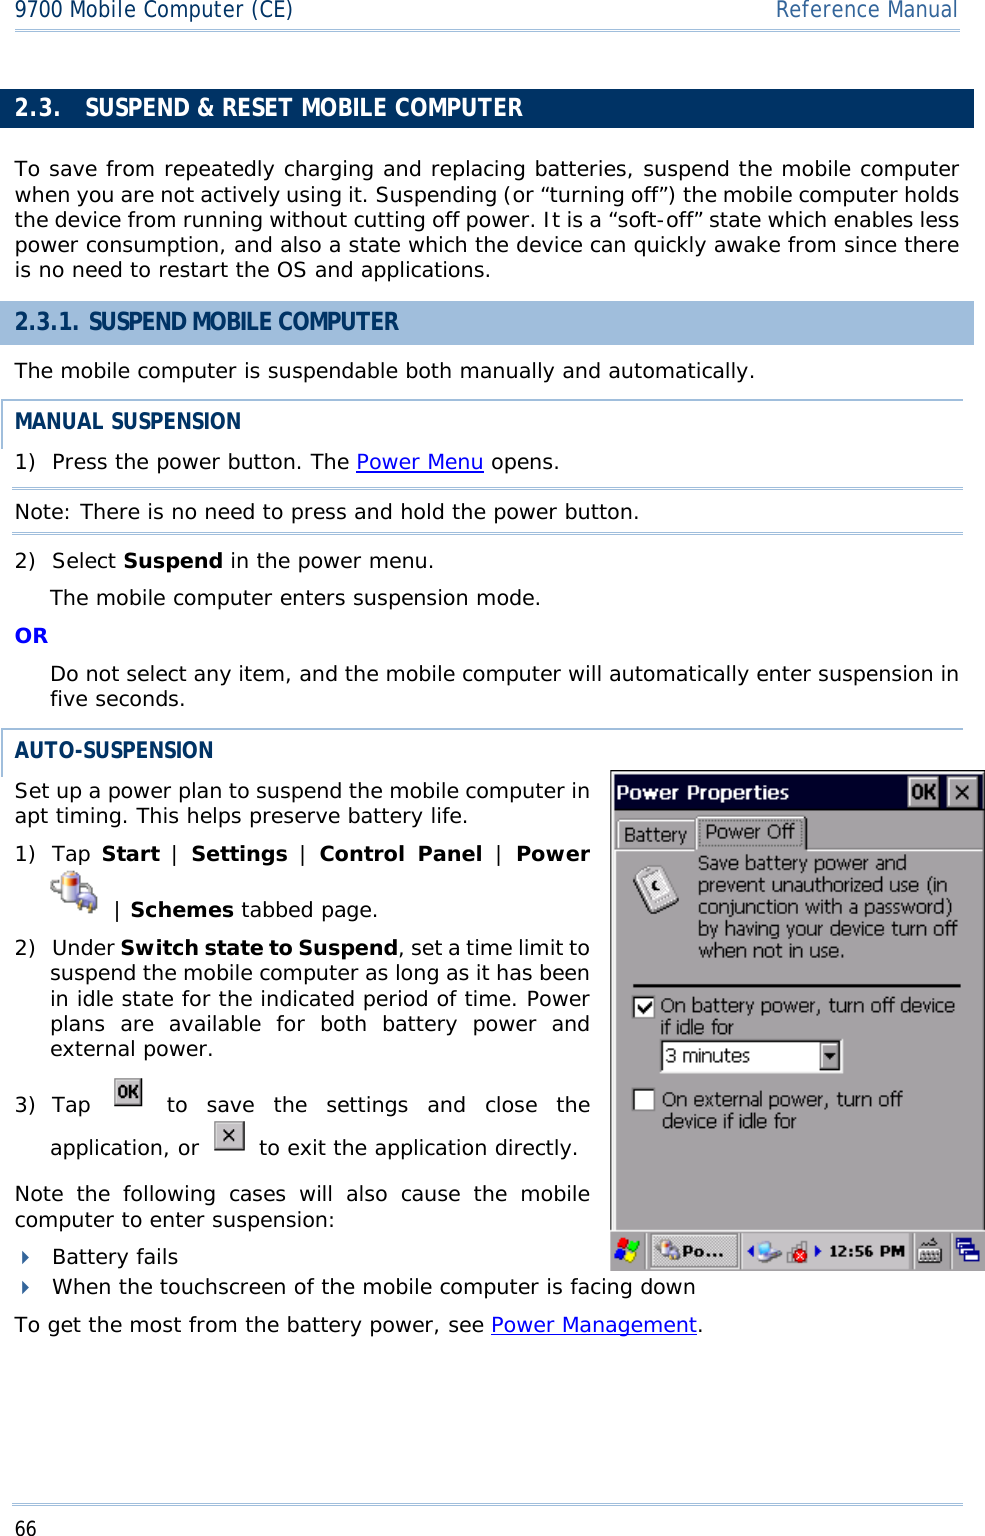 669700 Mobile Computer (CE)  Reference Manual2.3. SUSPEND &amp; RESET MOBILE COMPUTER To save from repeatedly charging and replacing batteries, suspend the mobile computer when you are not actively using it. Suspending (or “turning off”) the mobile computer holds the device from running without cutting off power. It is a “soft-off” state which enables less power consumption, and also a state which the device can quickly awake from since there is no need to restart the OS and applications. 2.3.1. SUSPEND MOBILE COMPUTER The mobile computer is suspendable both manually and automatically. MANUAL SUSPENSION 1) Press the power button. The Power Menu opens. Note: There is no need to press and hold the power button. 2) Select Suspend in the power menu. The mobile computer enters suspension mode. ORDo not select any item, and the mobile computer will automatically enter suspension in five seconds. AUTO-SUSPENSIONSet up a power plan to suspend the mobile computer in apt timing. This helps preserve battery life.  1) Tap Start | Settings | Control Panel |Power |Schemes tabbed page.  2) Under Switch state to Suspend, set a time limit to suspend the mobile computer as long as it has been in idle state for the indicated period of time. Power plans are available for both battery power and external power. 3) Tap  to save the settings and close the application, or   to exit the application directly. Note the following cases will also cause the mobile computer to enter suspension: Battery fails When the touchscreen of the mobile computer is facing down To get the most from the battery power, see Power Management.